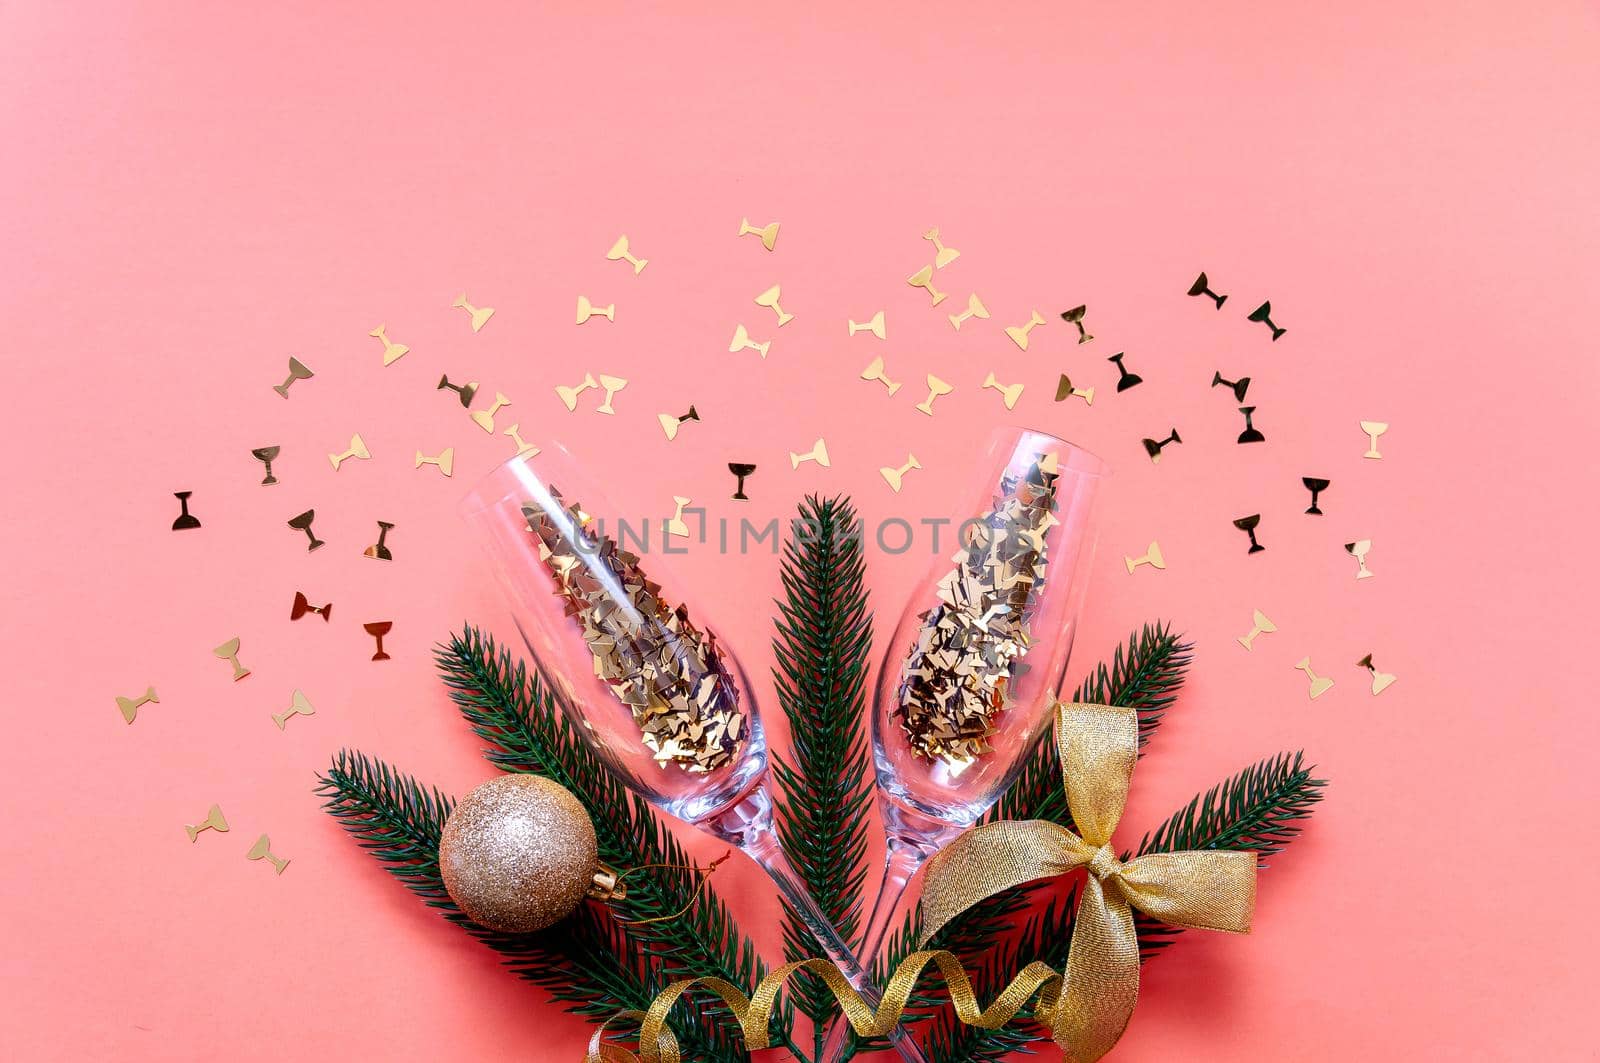 Champagne Glasses with Golden Confetti and Branches Fir Tree on Pink Background. Creative Christmas Concept.